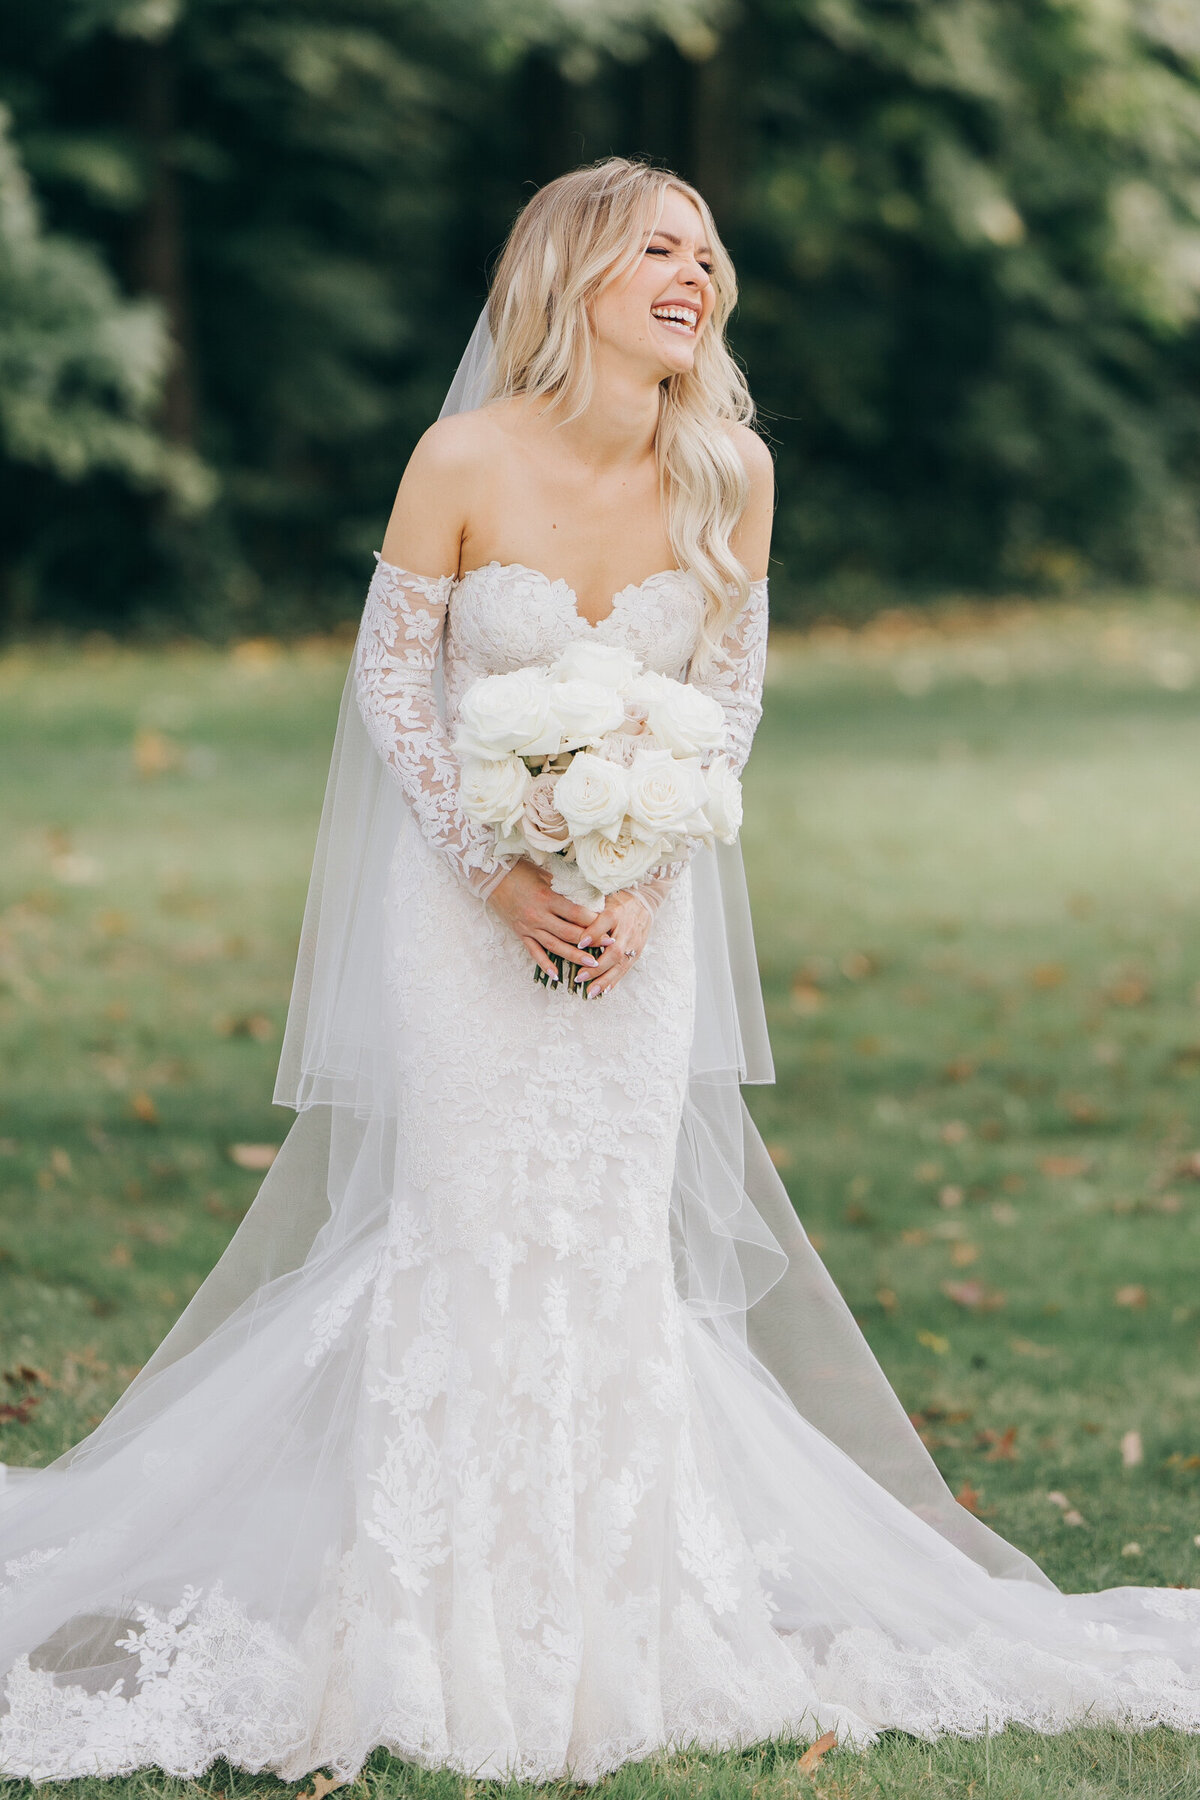 Candid portrait of glamorous bride laughing white holding chic bouquet of roses